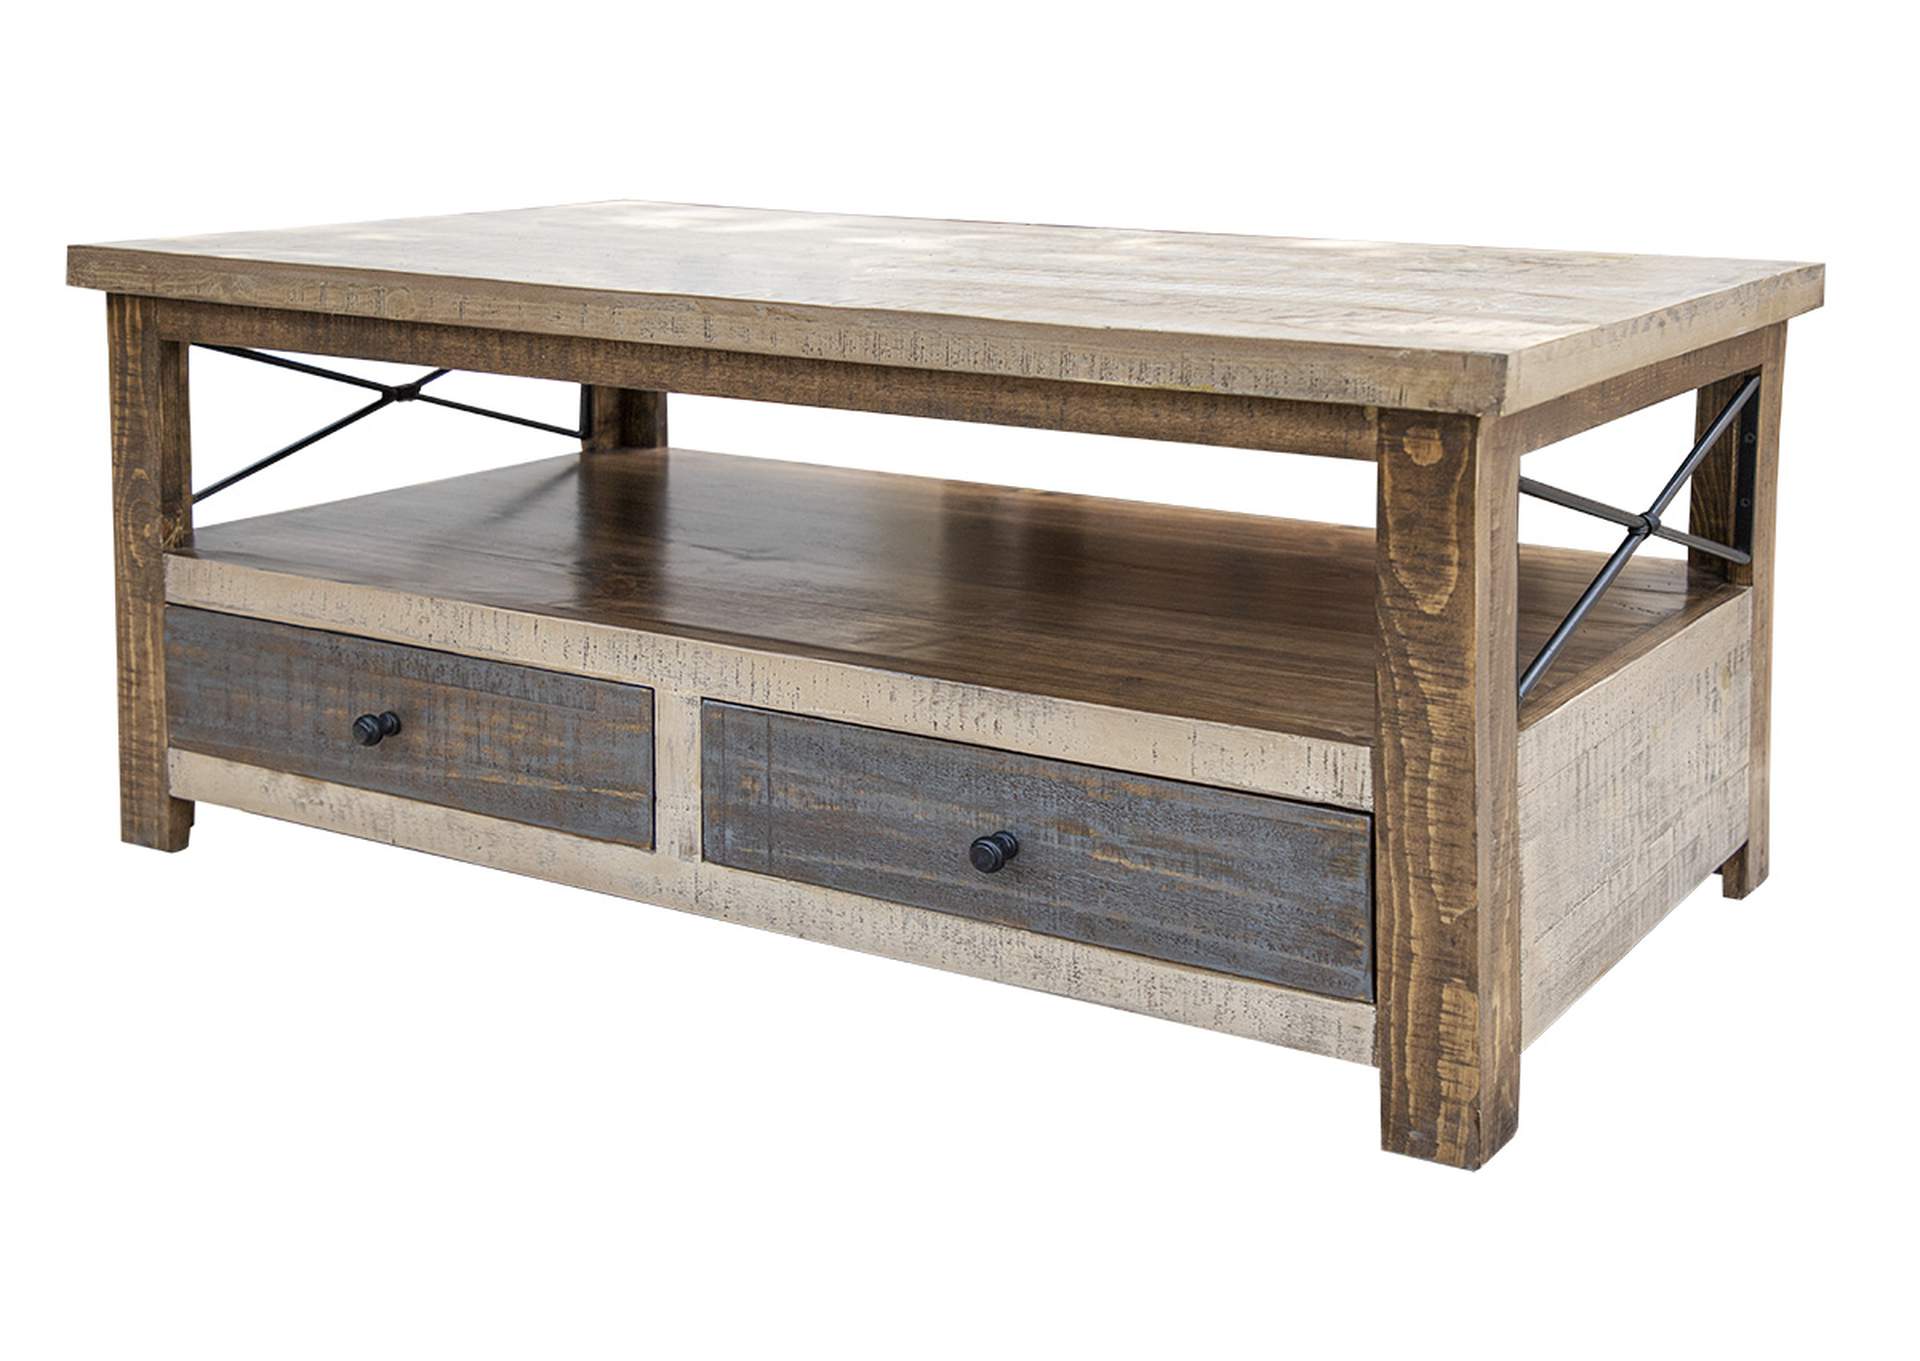 Andaluz 4 Drawers Cocktail Table,International Furniture Direct